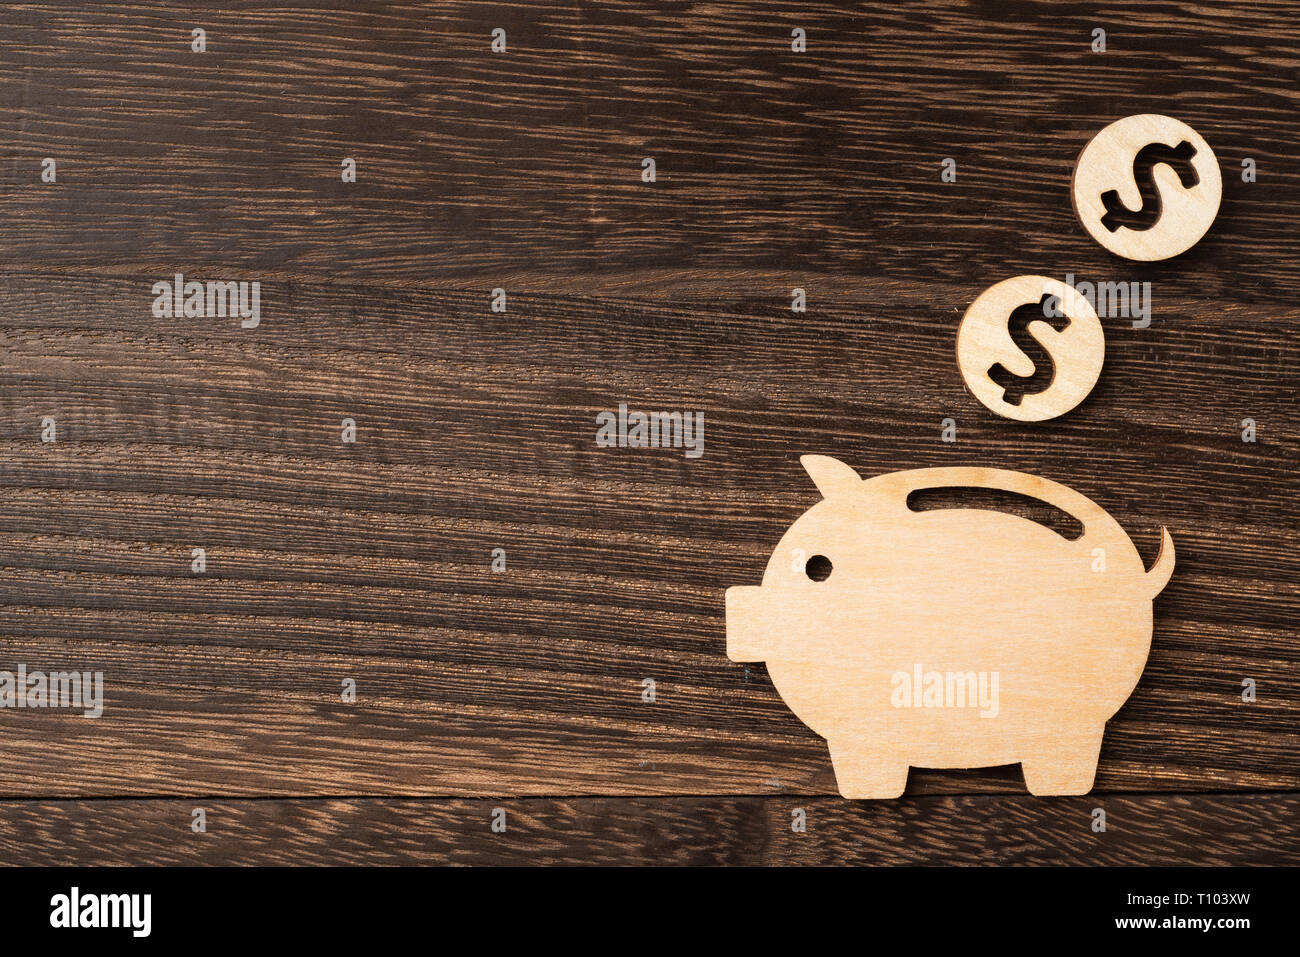 financial and design concept - wooden moneybox pig piece on dark wood background. it's saving, investing concept Stock Photo